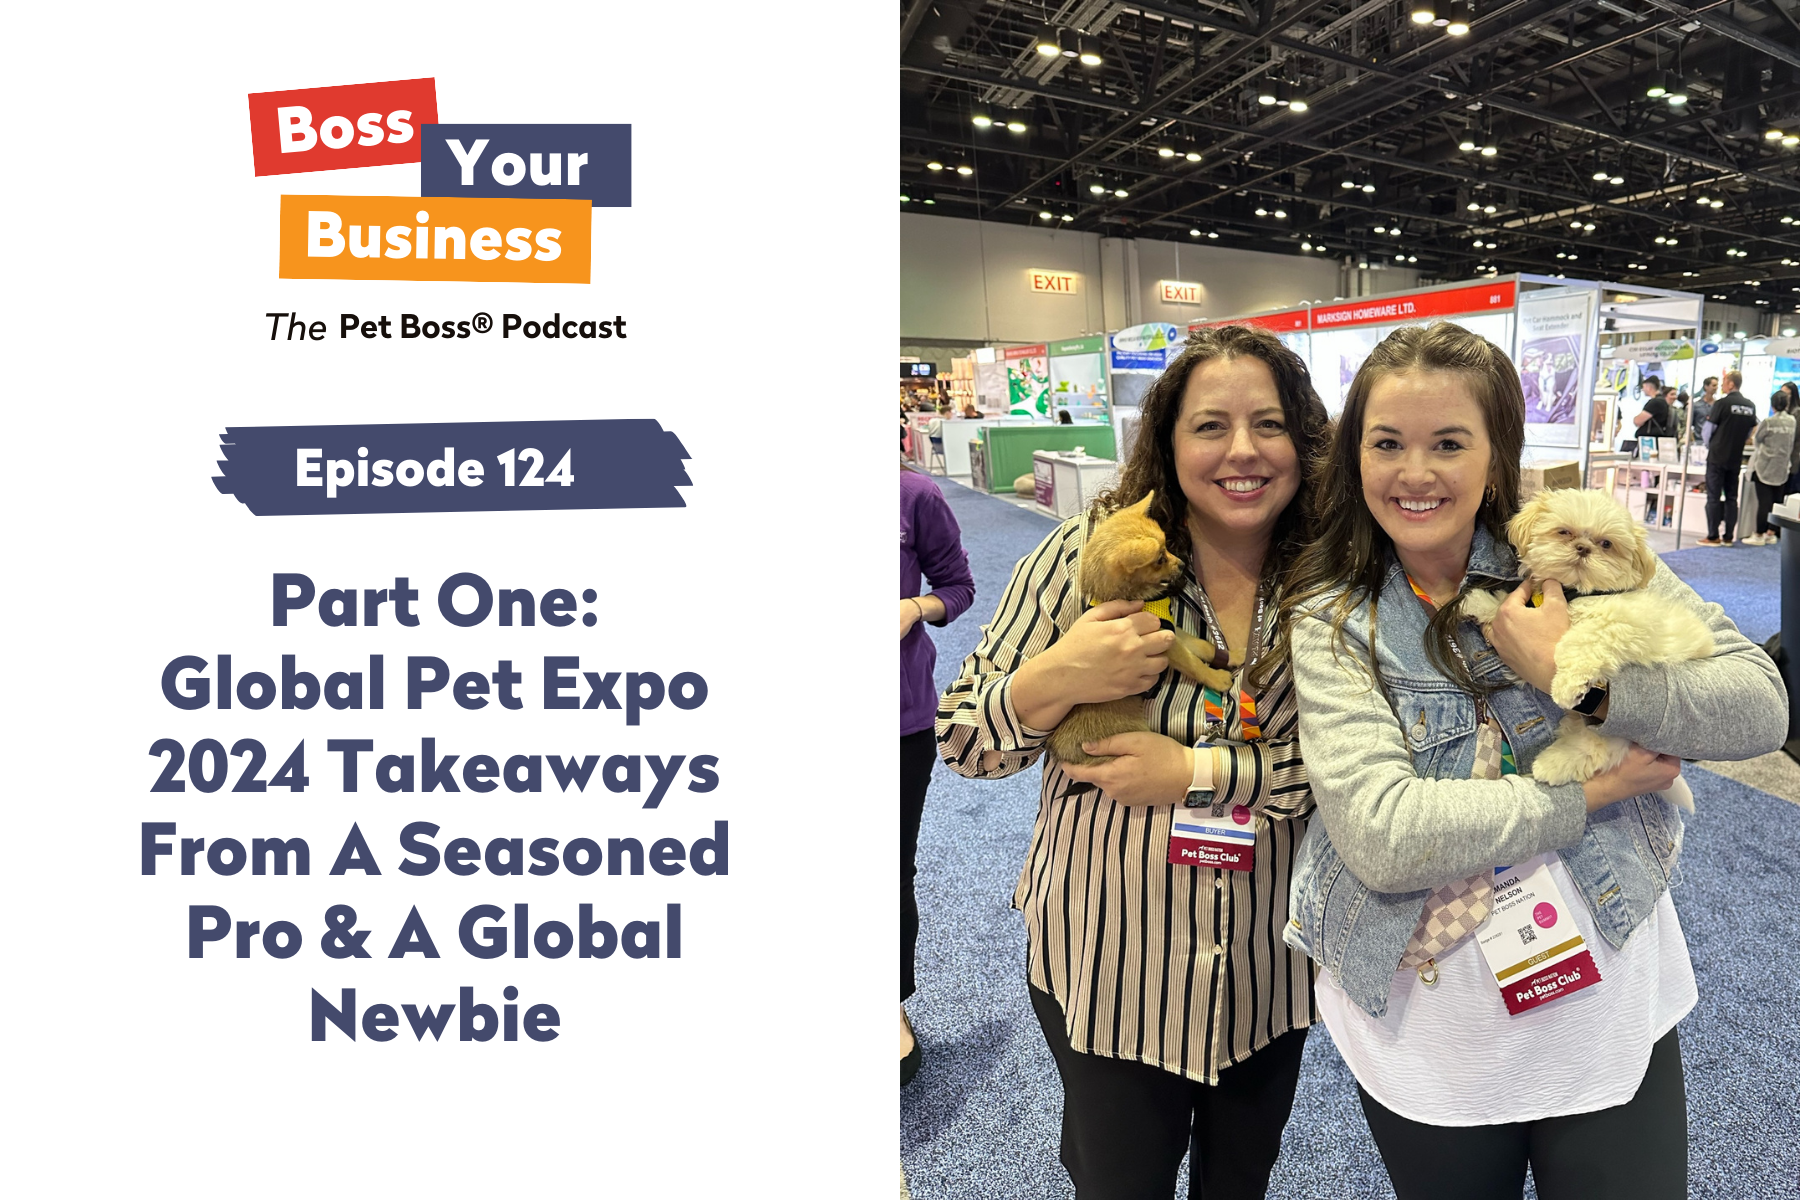 Episode 124 | Part One: Global Pet Expo 2024 Takeaways From A Seasoned Pro & A Global Newbie